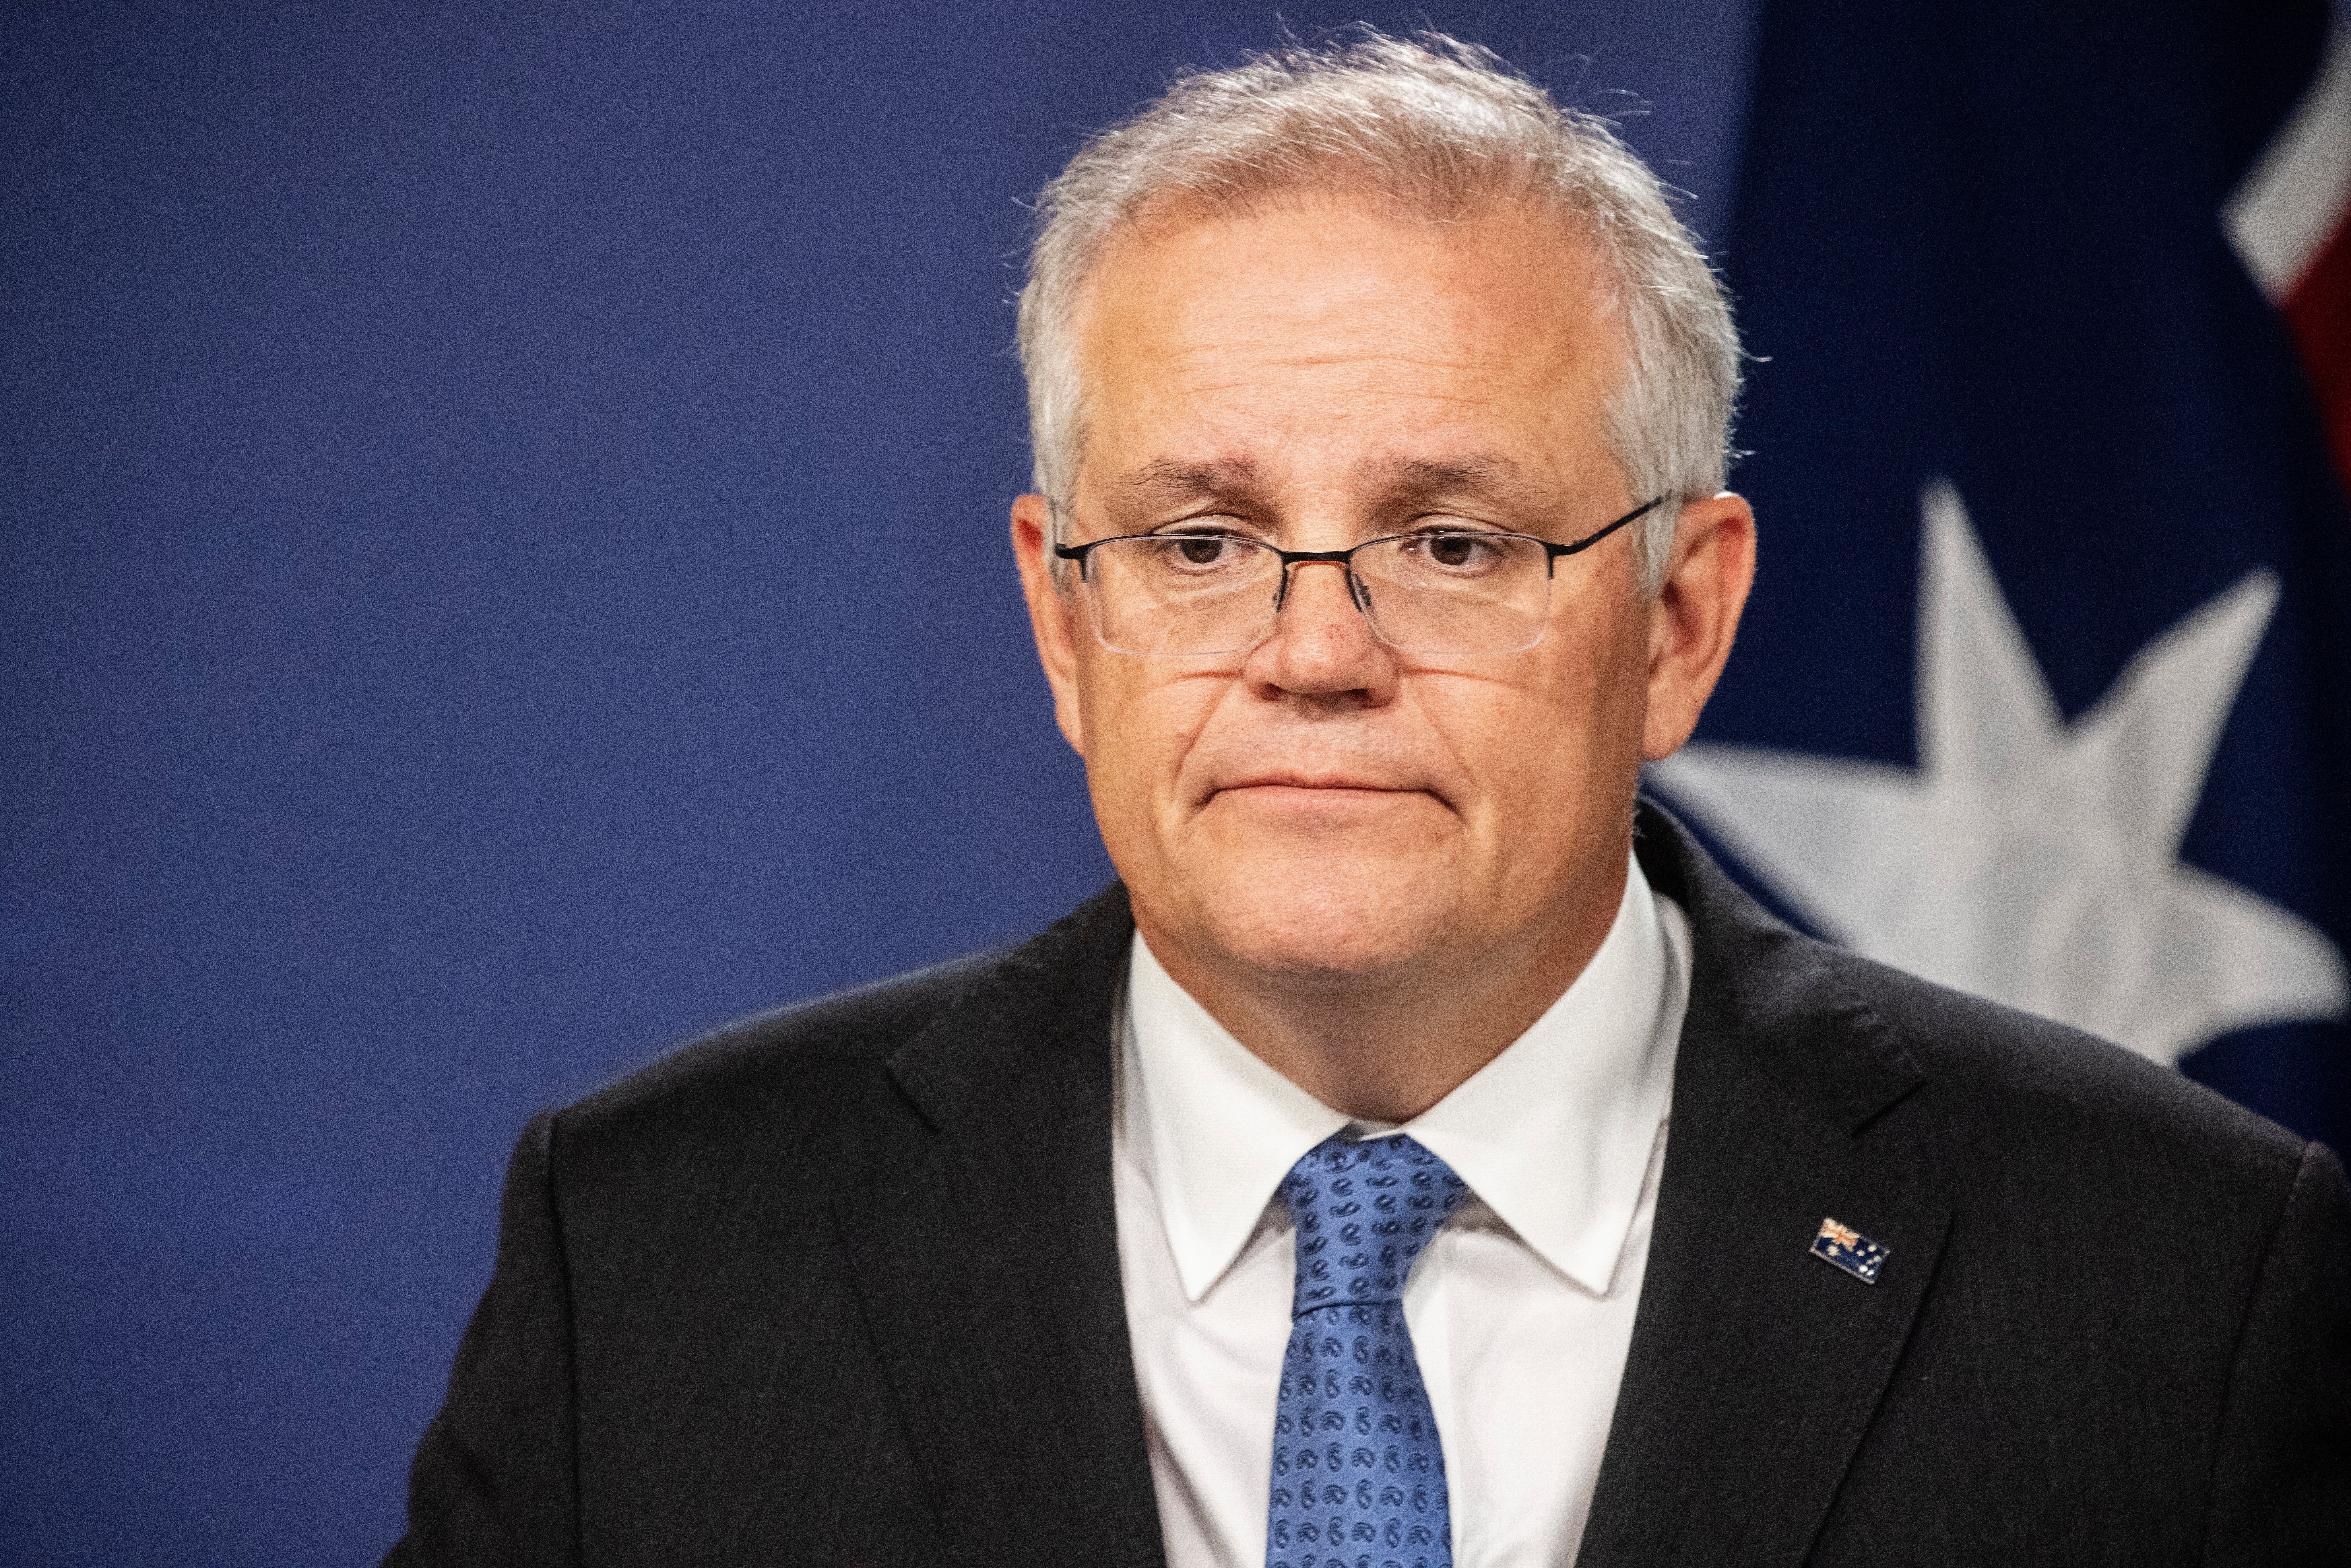 Scott Morrison announced flights to and from India will be suspended until the middle of May.